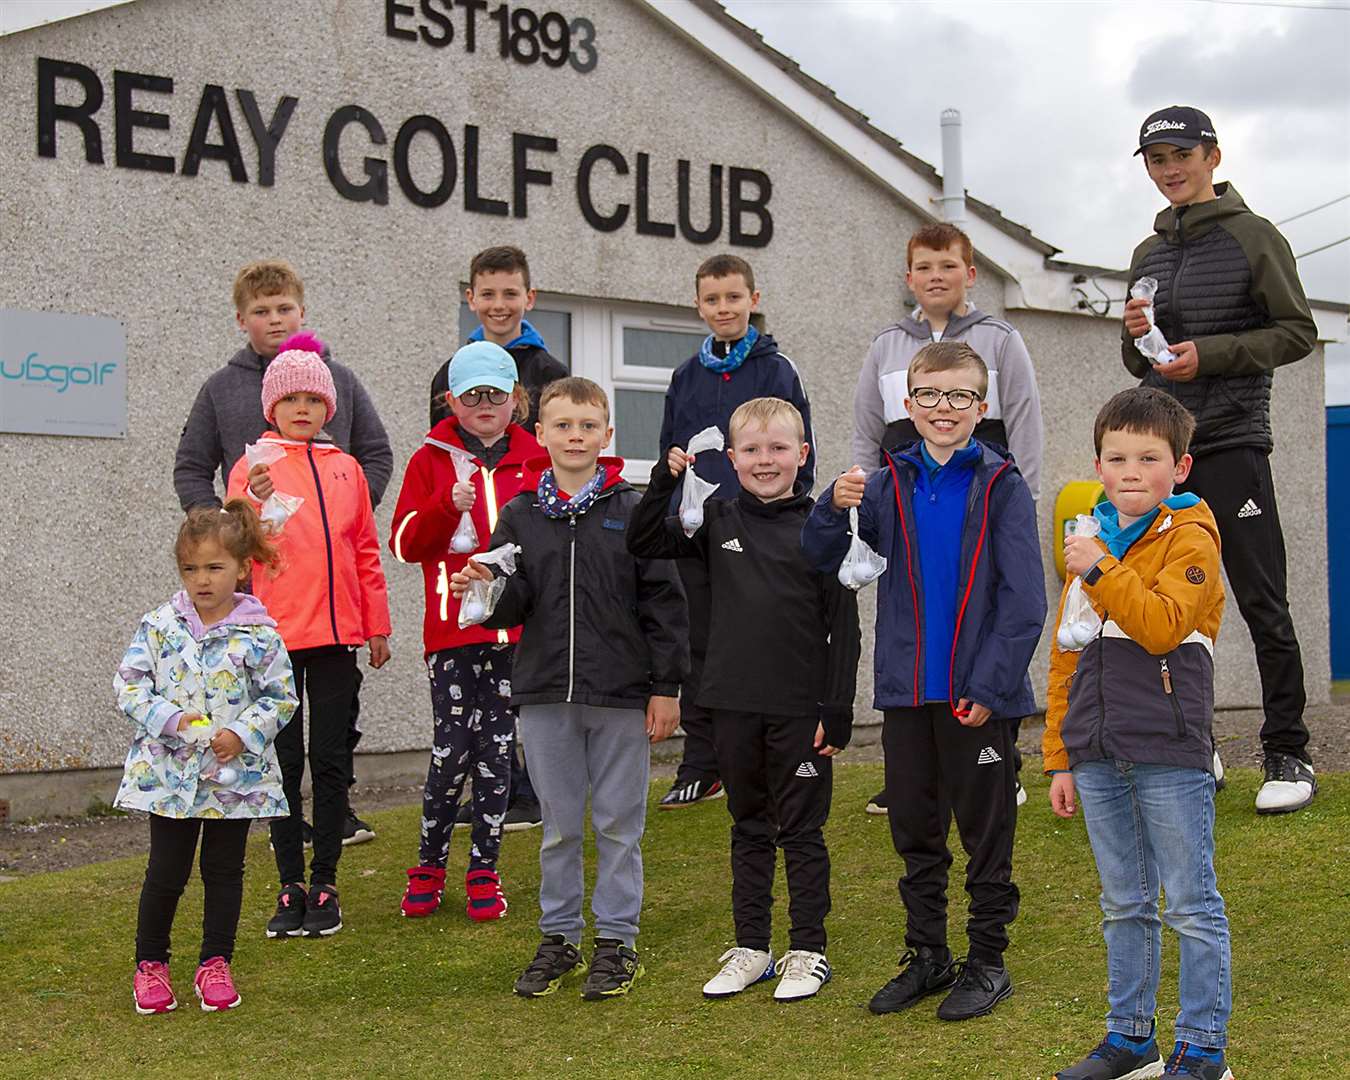 Winners in Reay Golf Club's medal competition for juniors last Friday.